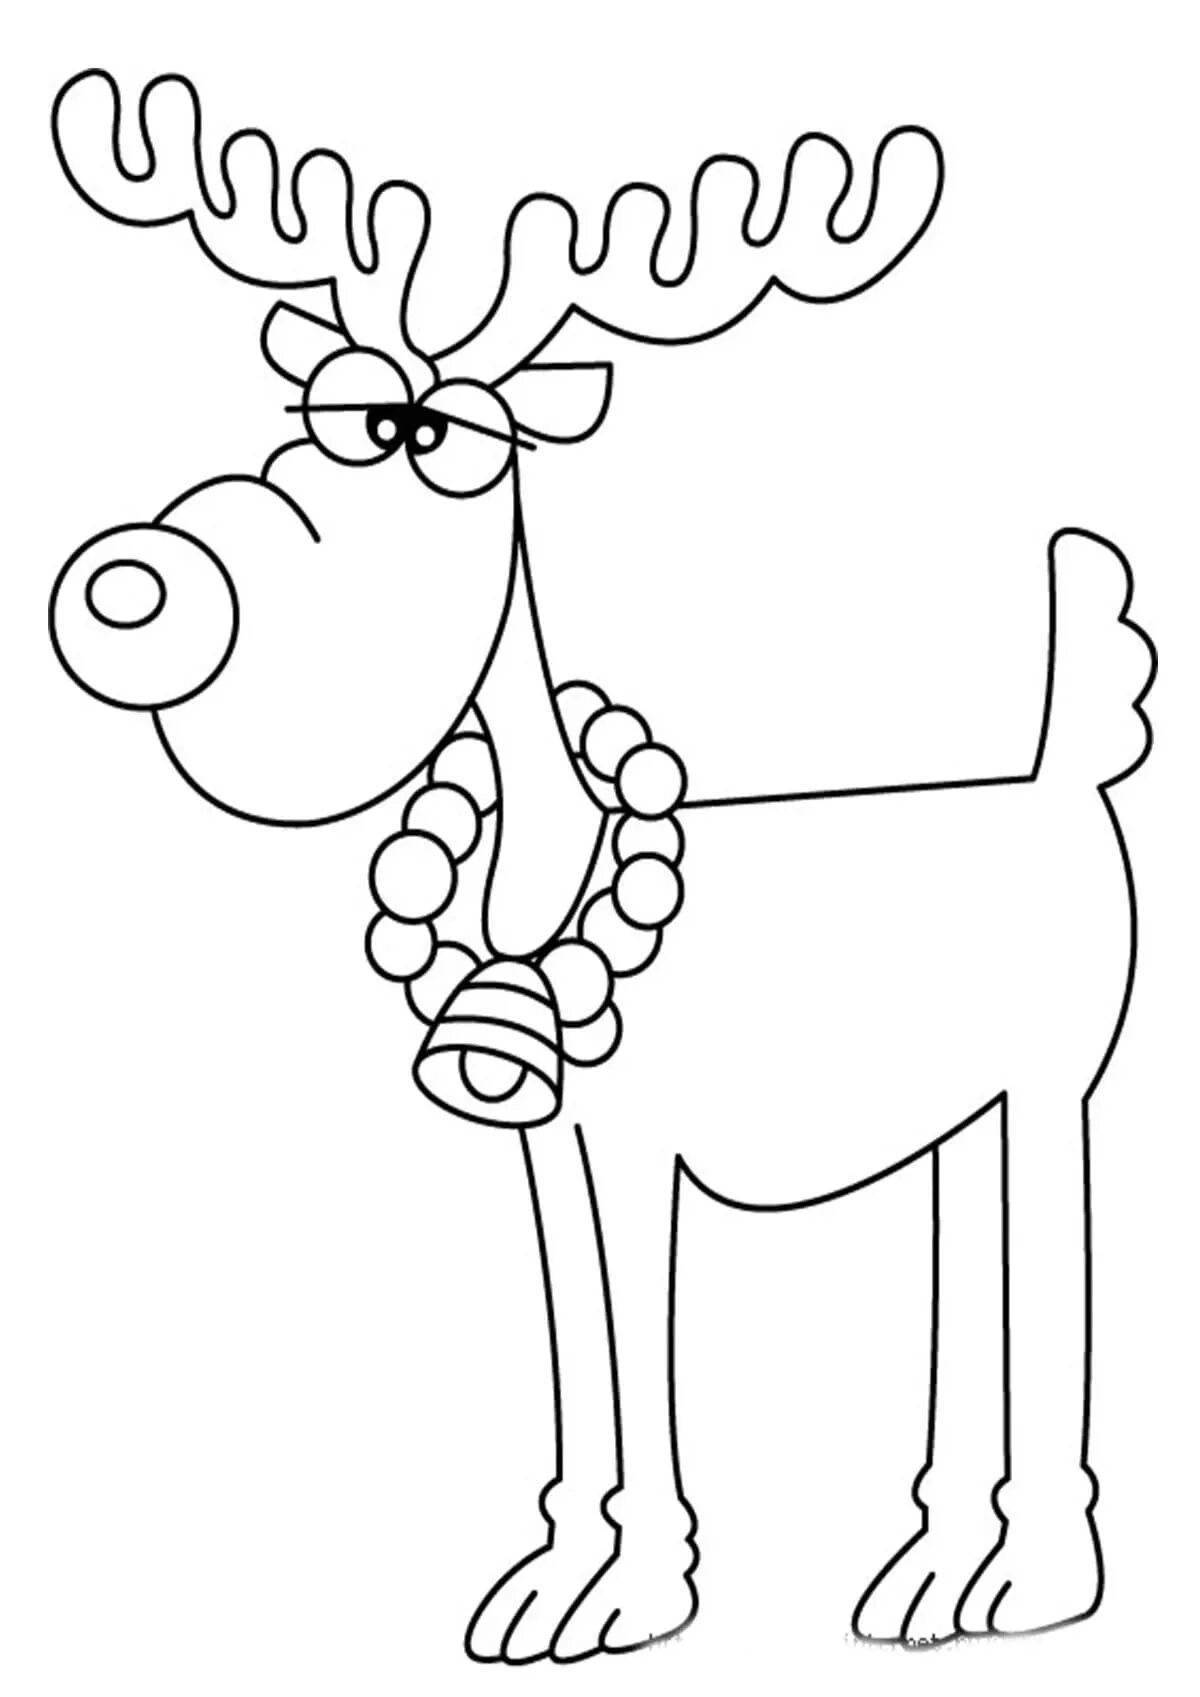 Coloring book gorgeous Christmas deer